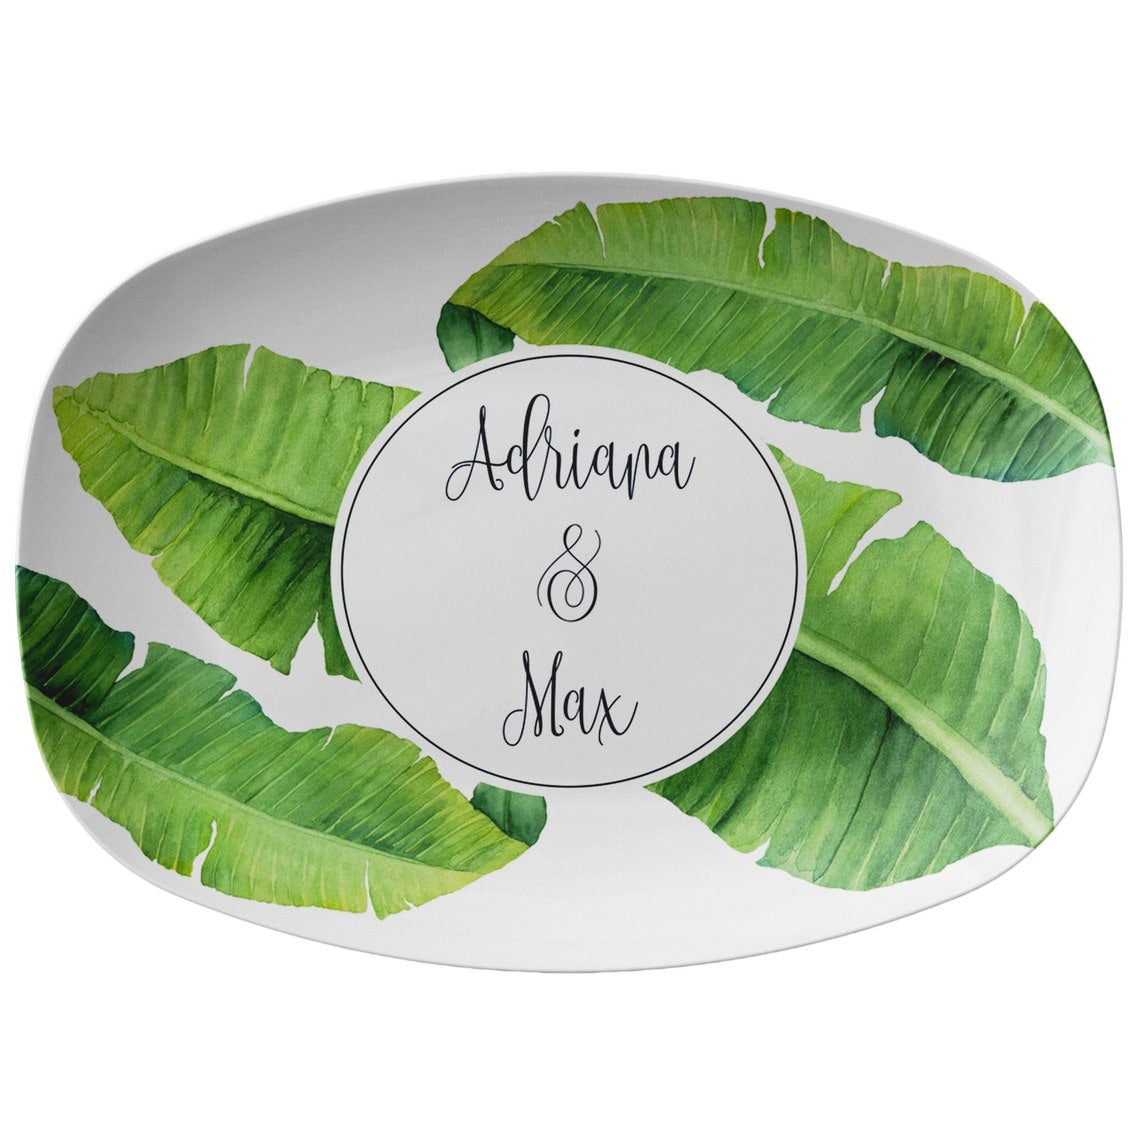 Personalized Serving Platter, Banana Leaf, Green and White, Luxury Plastic